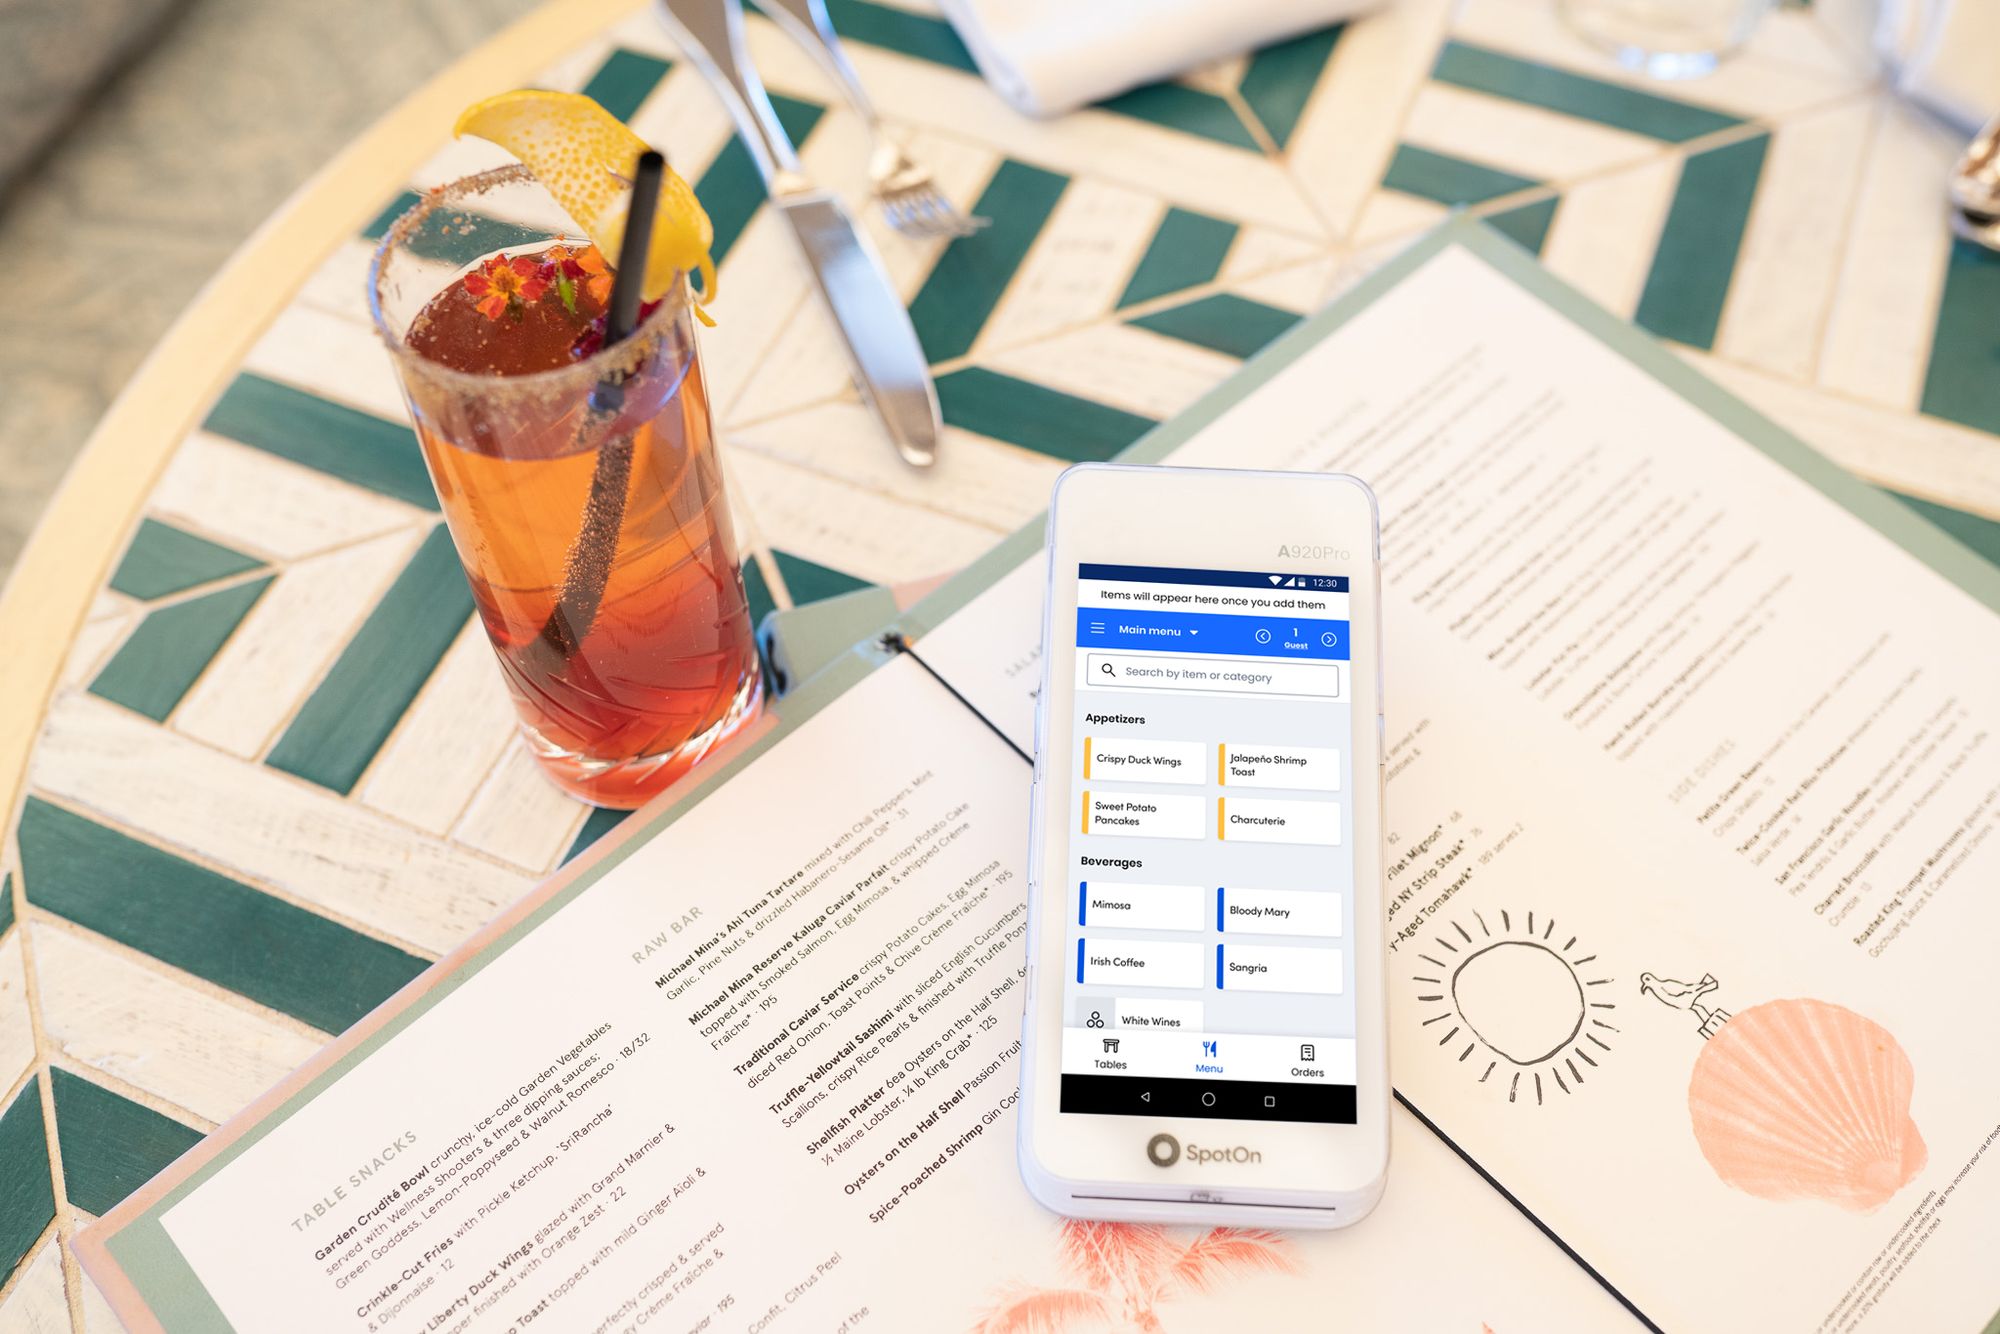 A small handheld point-of-sale device sits on a menu next to a glass of ice tea.